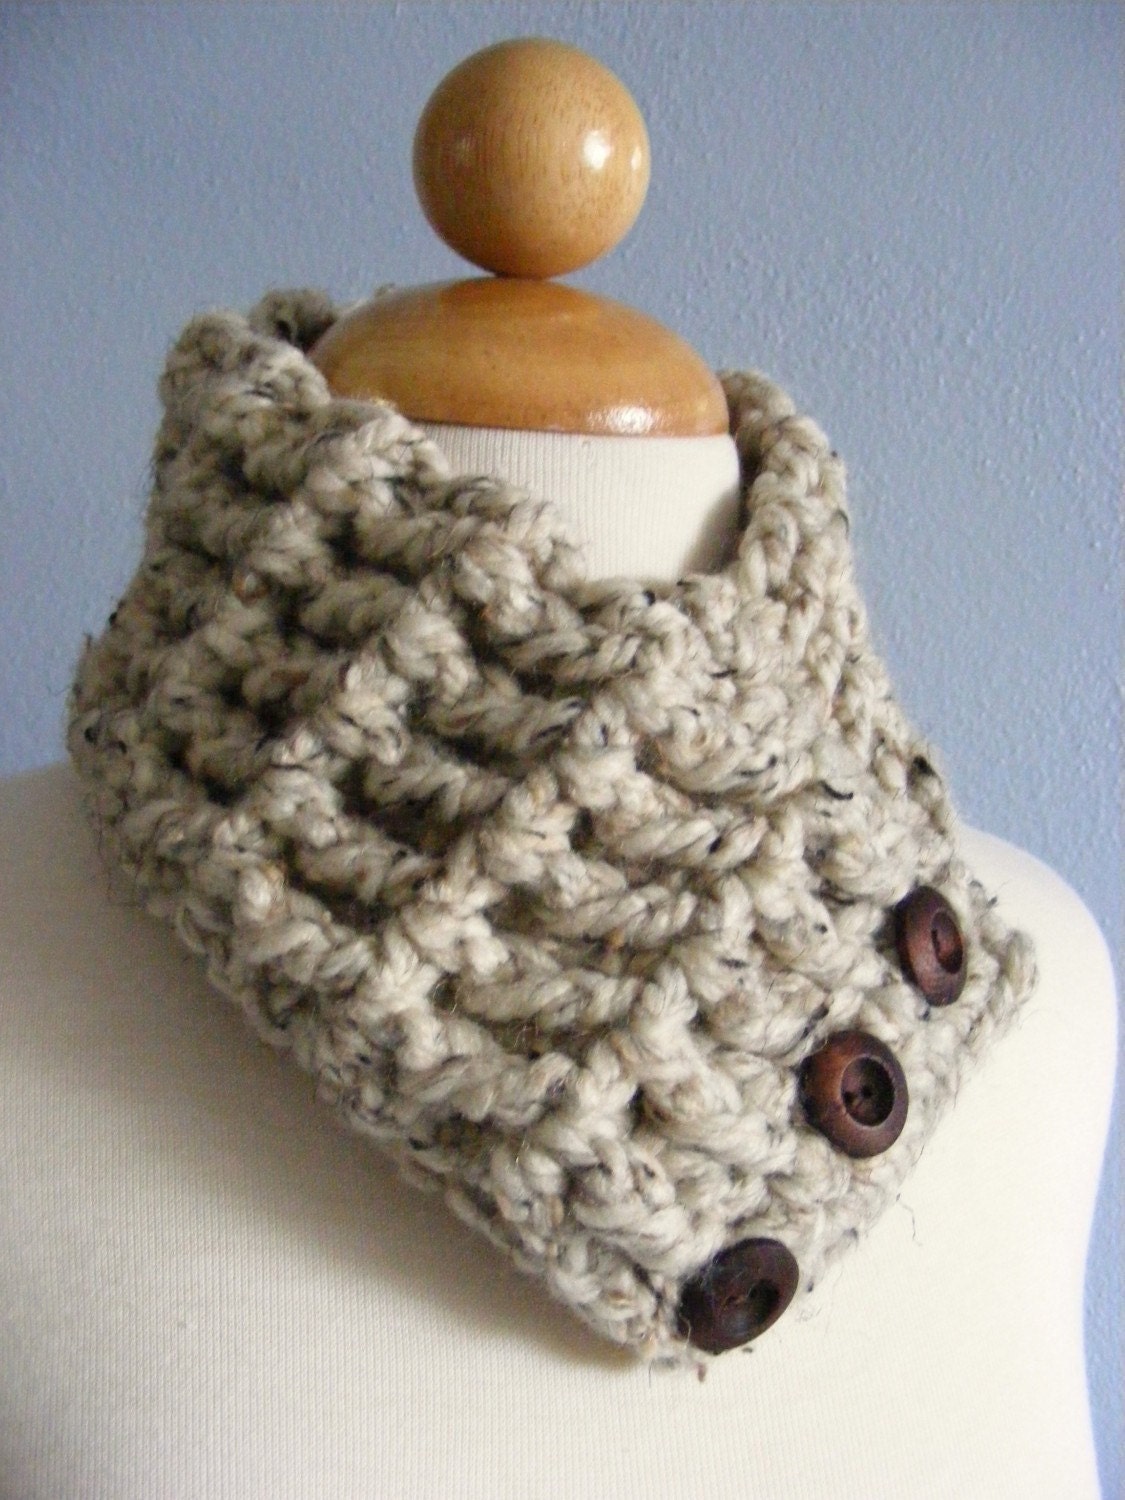 Womens Textured Scarflette, Cowl, Neckwarmer - Oatmeal with Dark Brown Wood Buttons